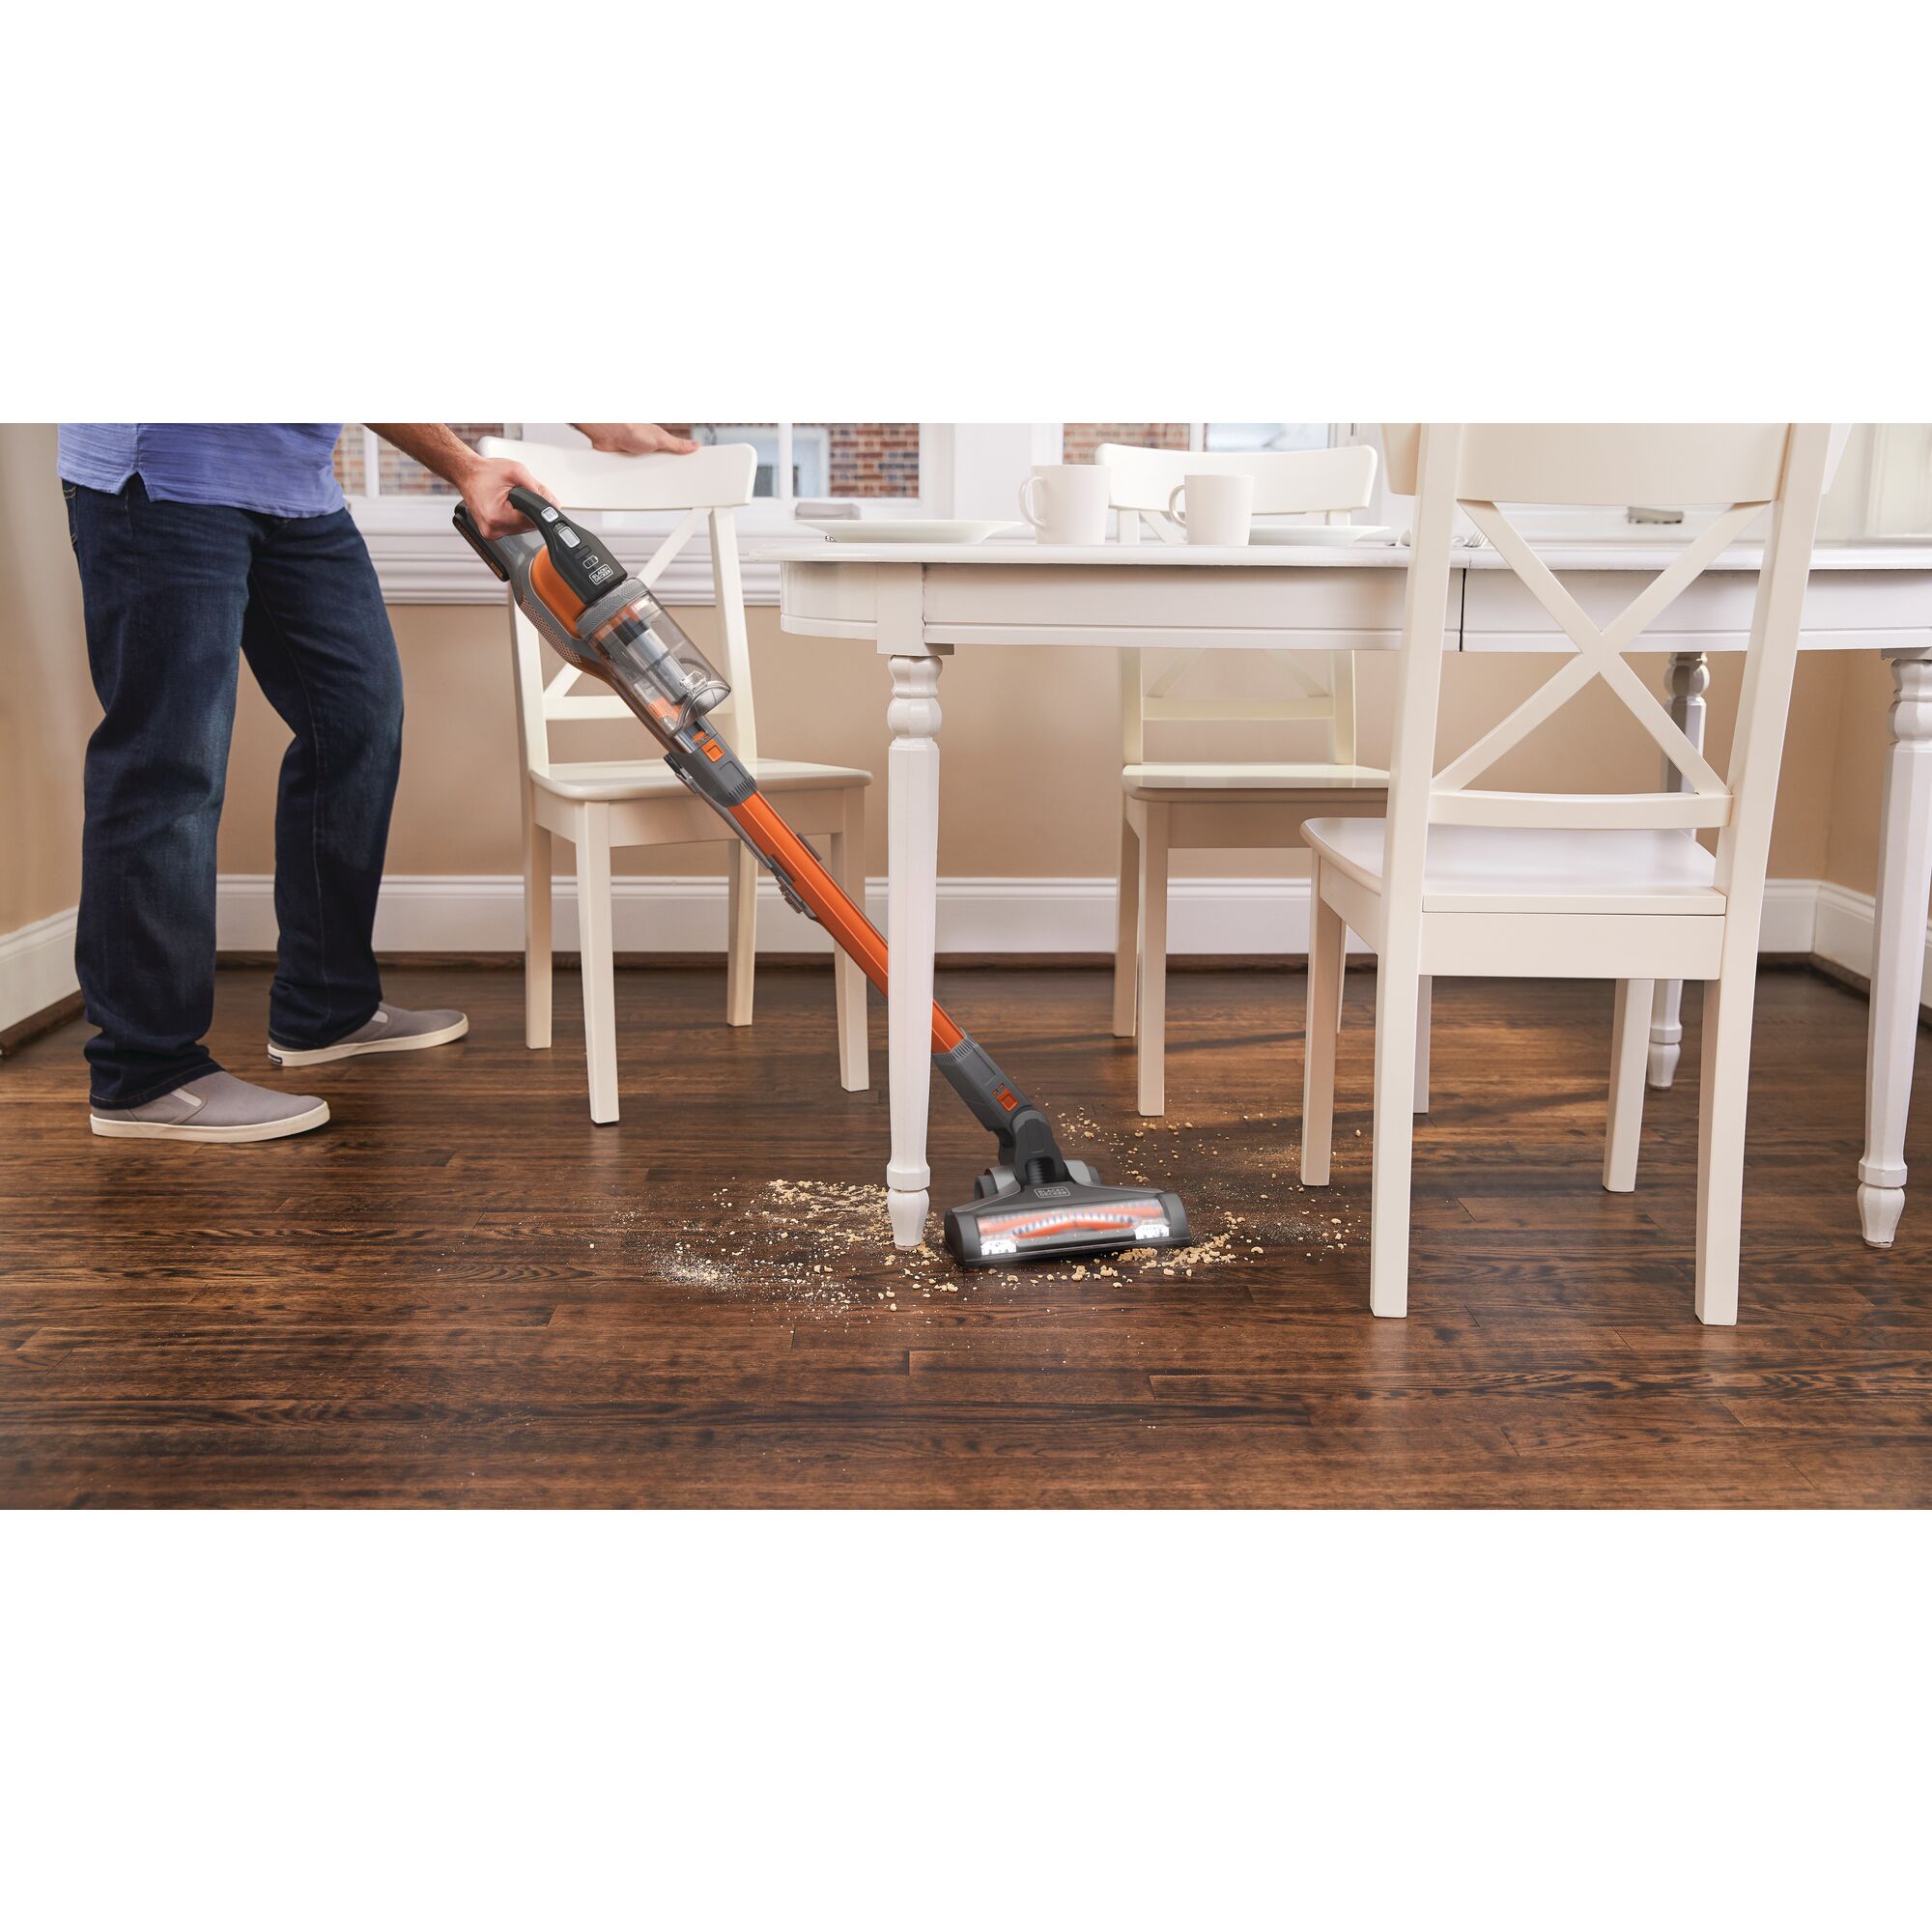 POWERSERIES™ Extreme™ Cordless Stick Vacuum Cleaner cleaning under table on hardwood floors